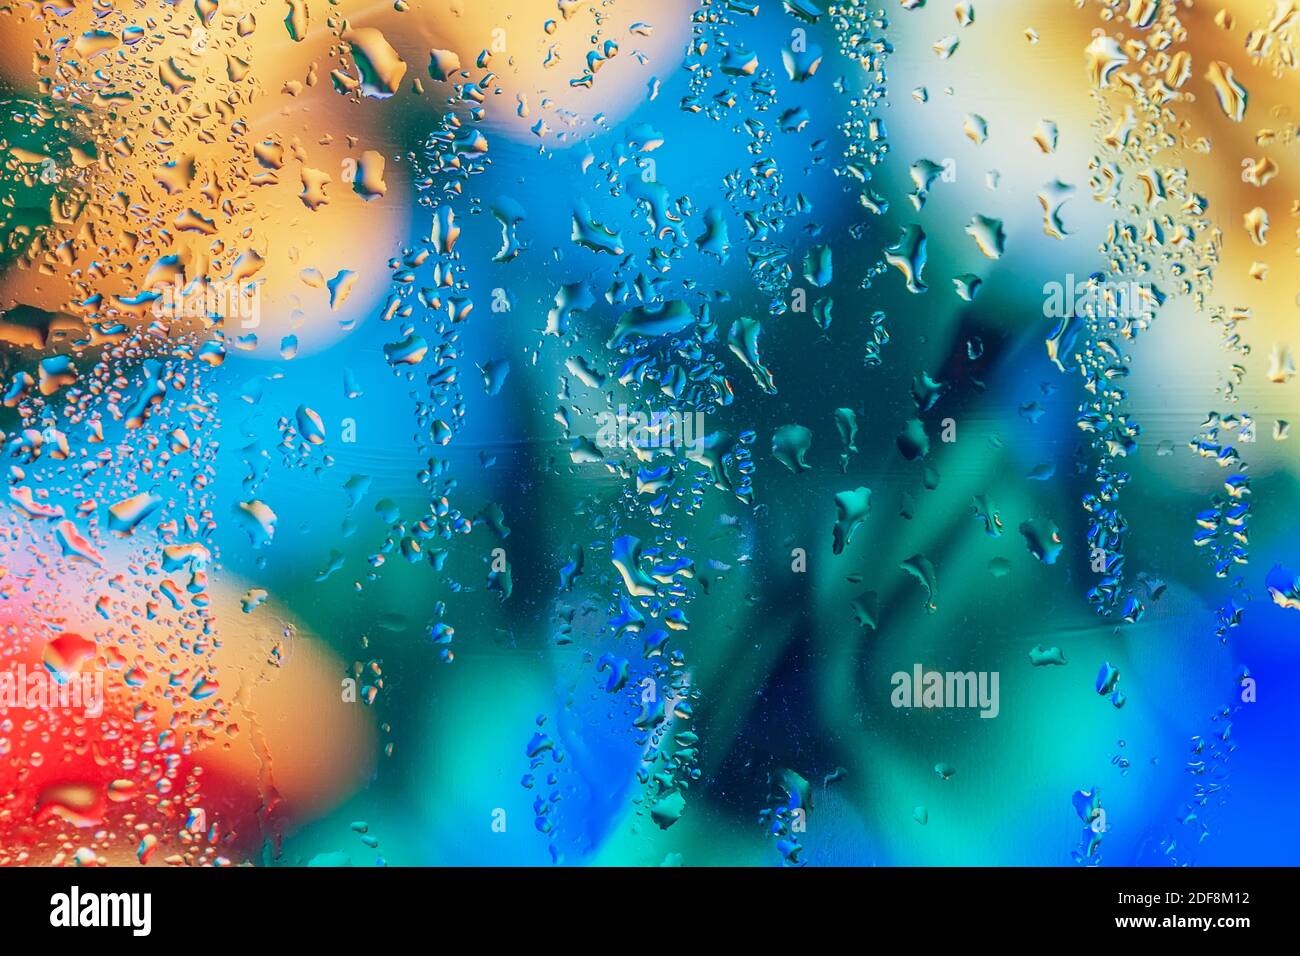 Abstract blurred colorful, picturesque background with Drops of water on window glass, bright shades, selective focus. Stock Photo